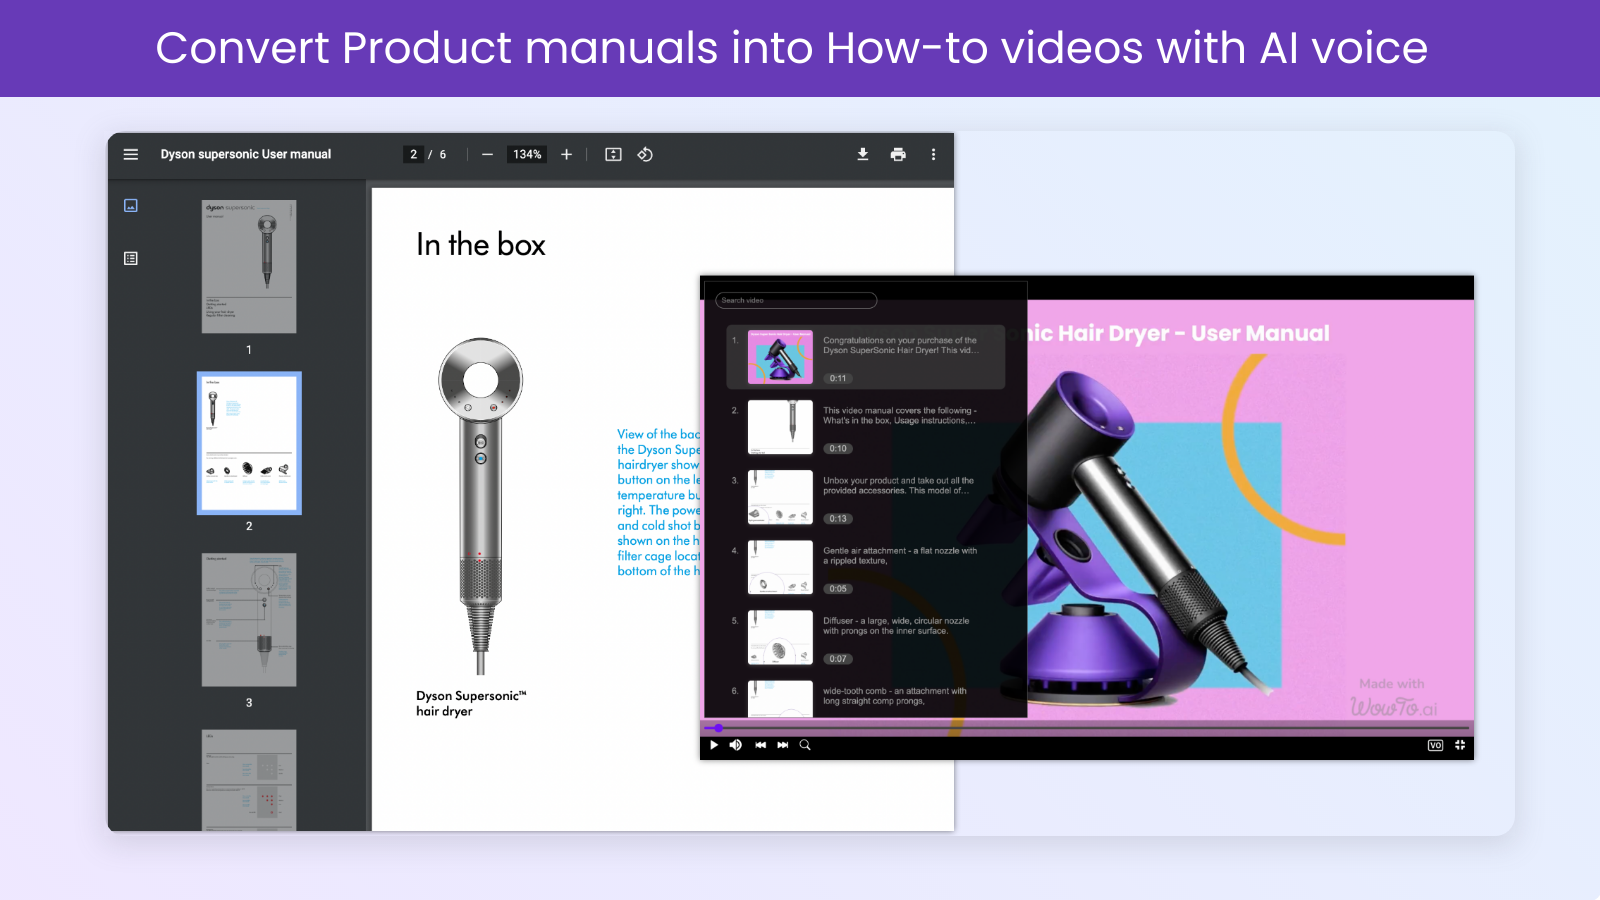 Convert PDF manuals to how-to videos with voice